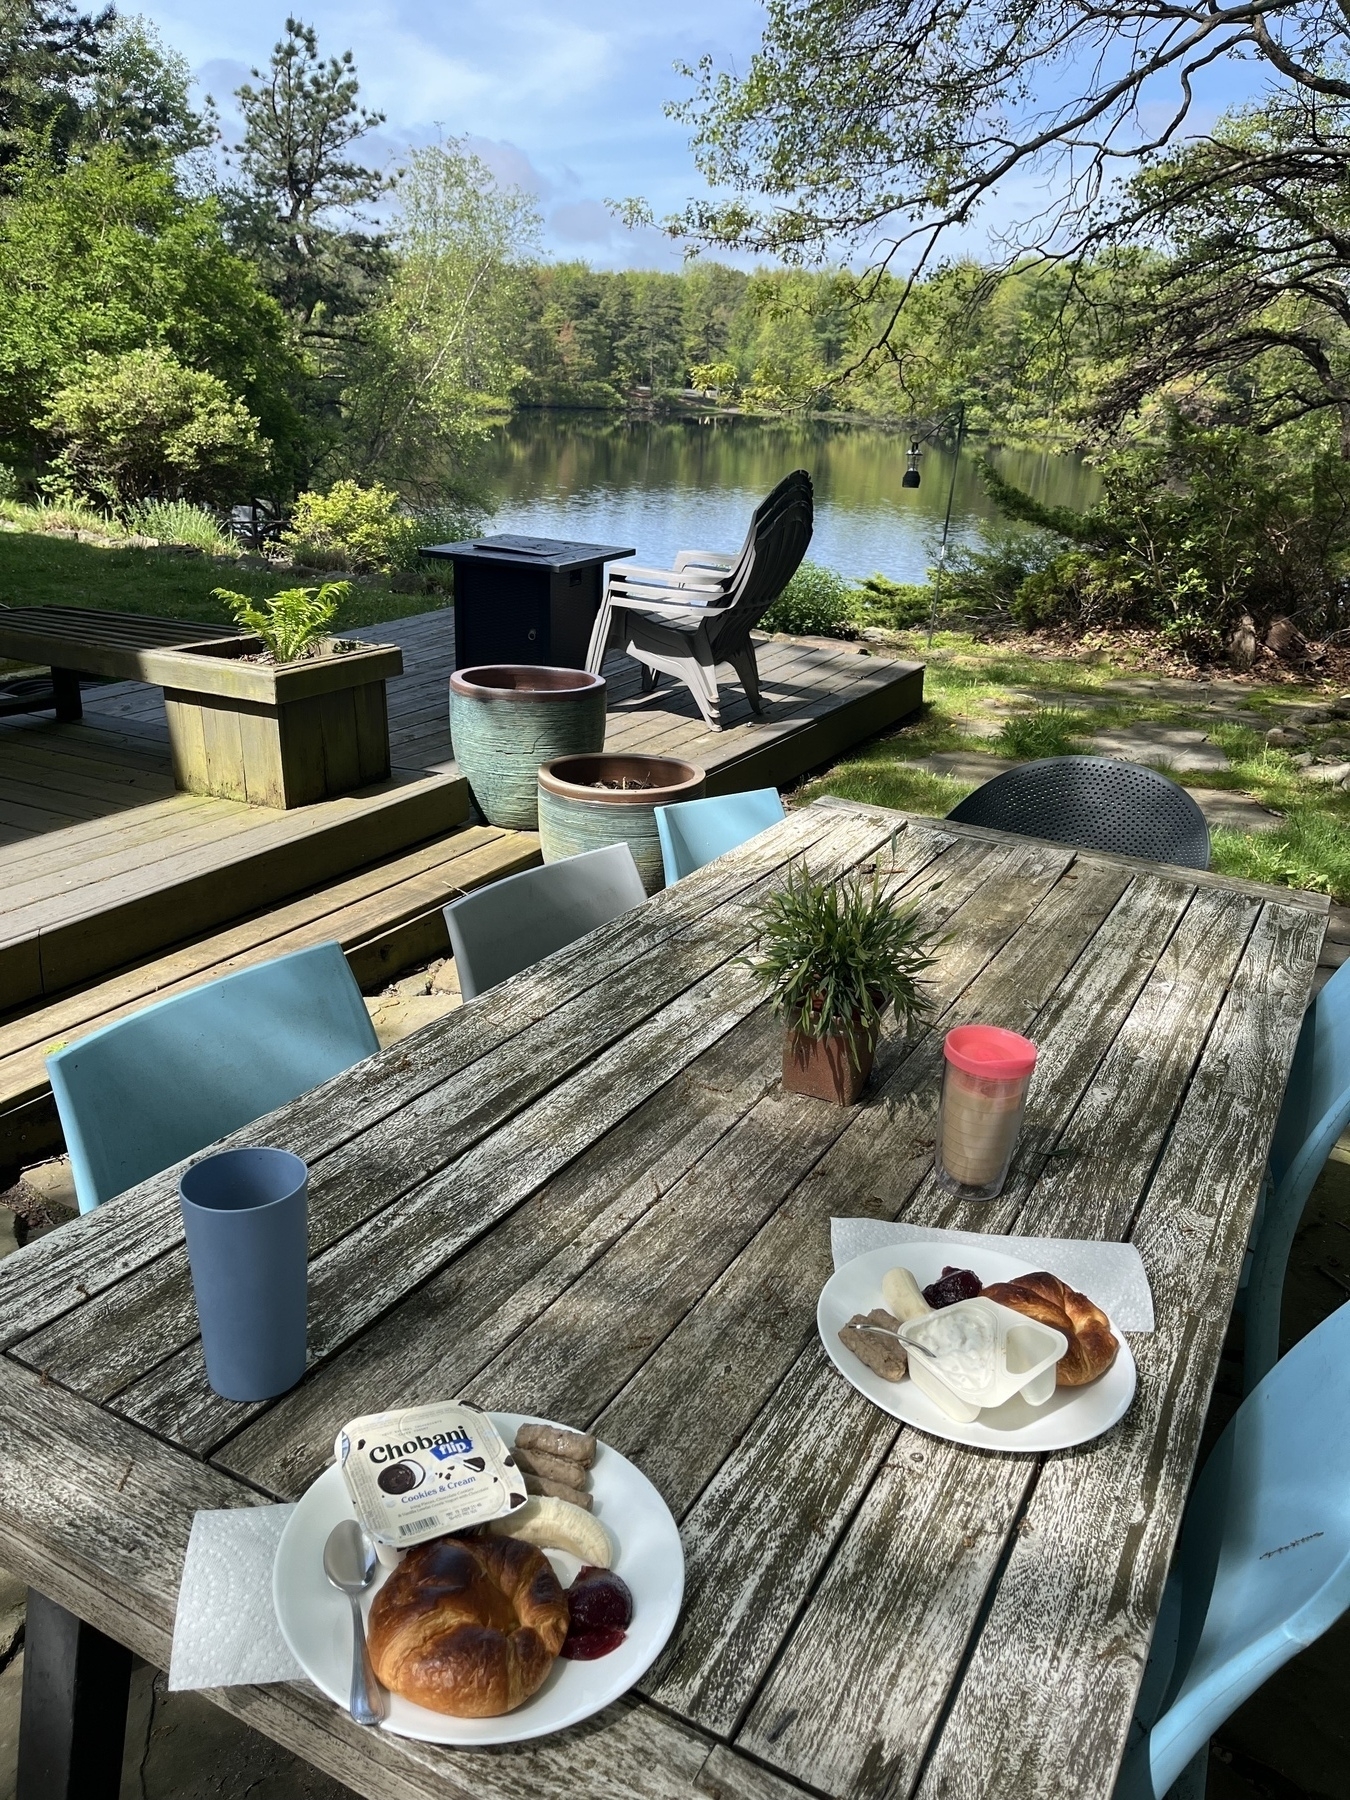 Breakfast plates with croissants, yogurt, bananas, sausages, and jam on a weathered wooden table. Blue chairs surround the table. In the background, a deck with planters, chairs, and a view of a lake and trees under a blue sky.